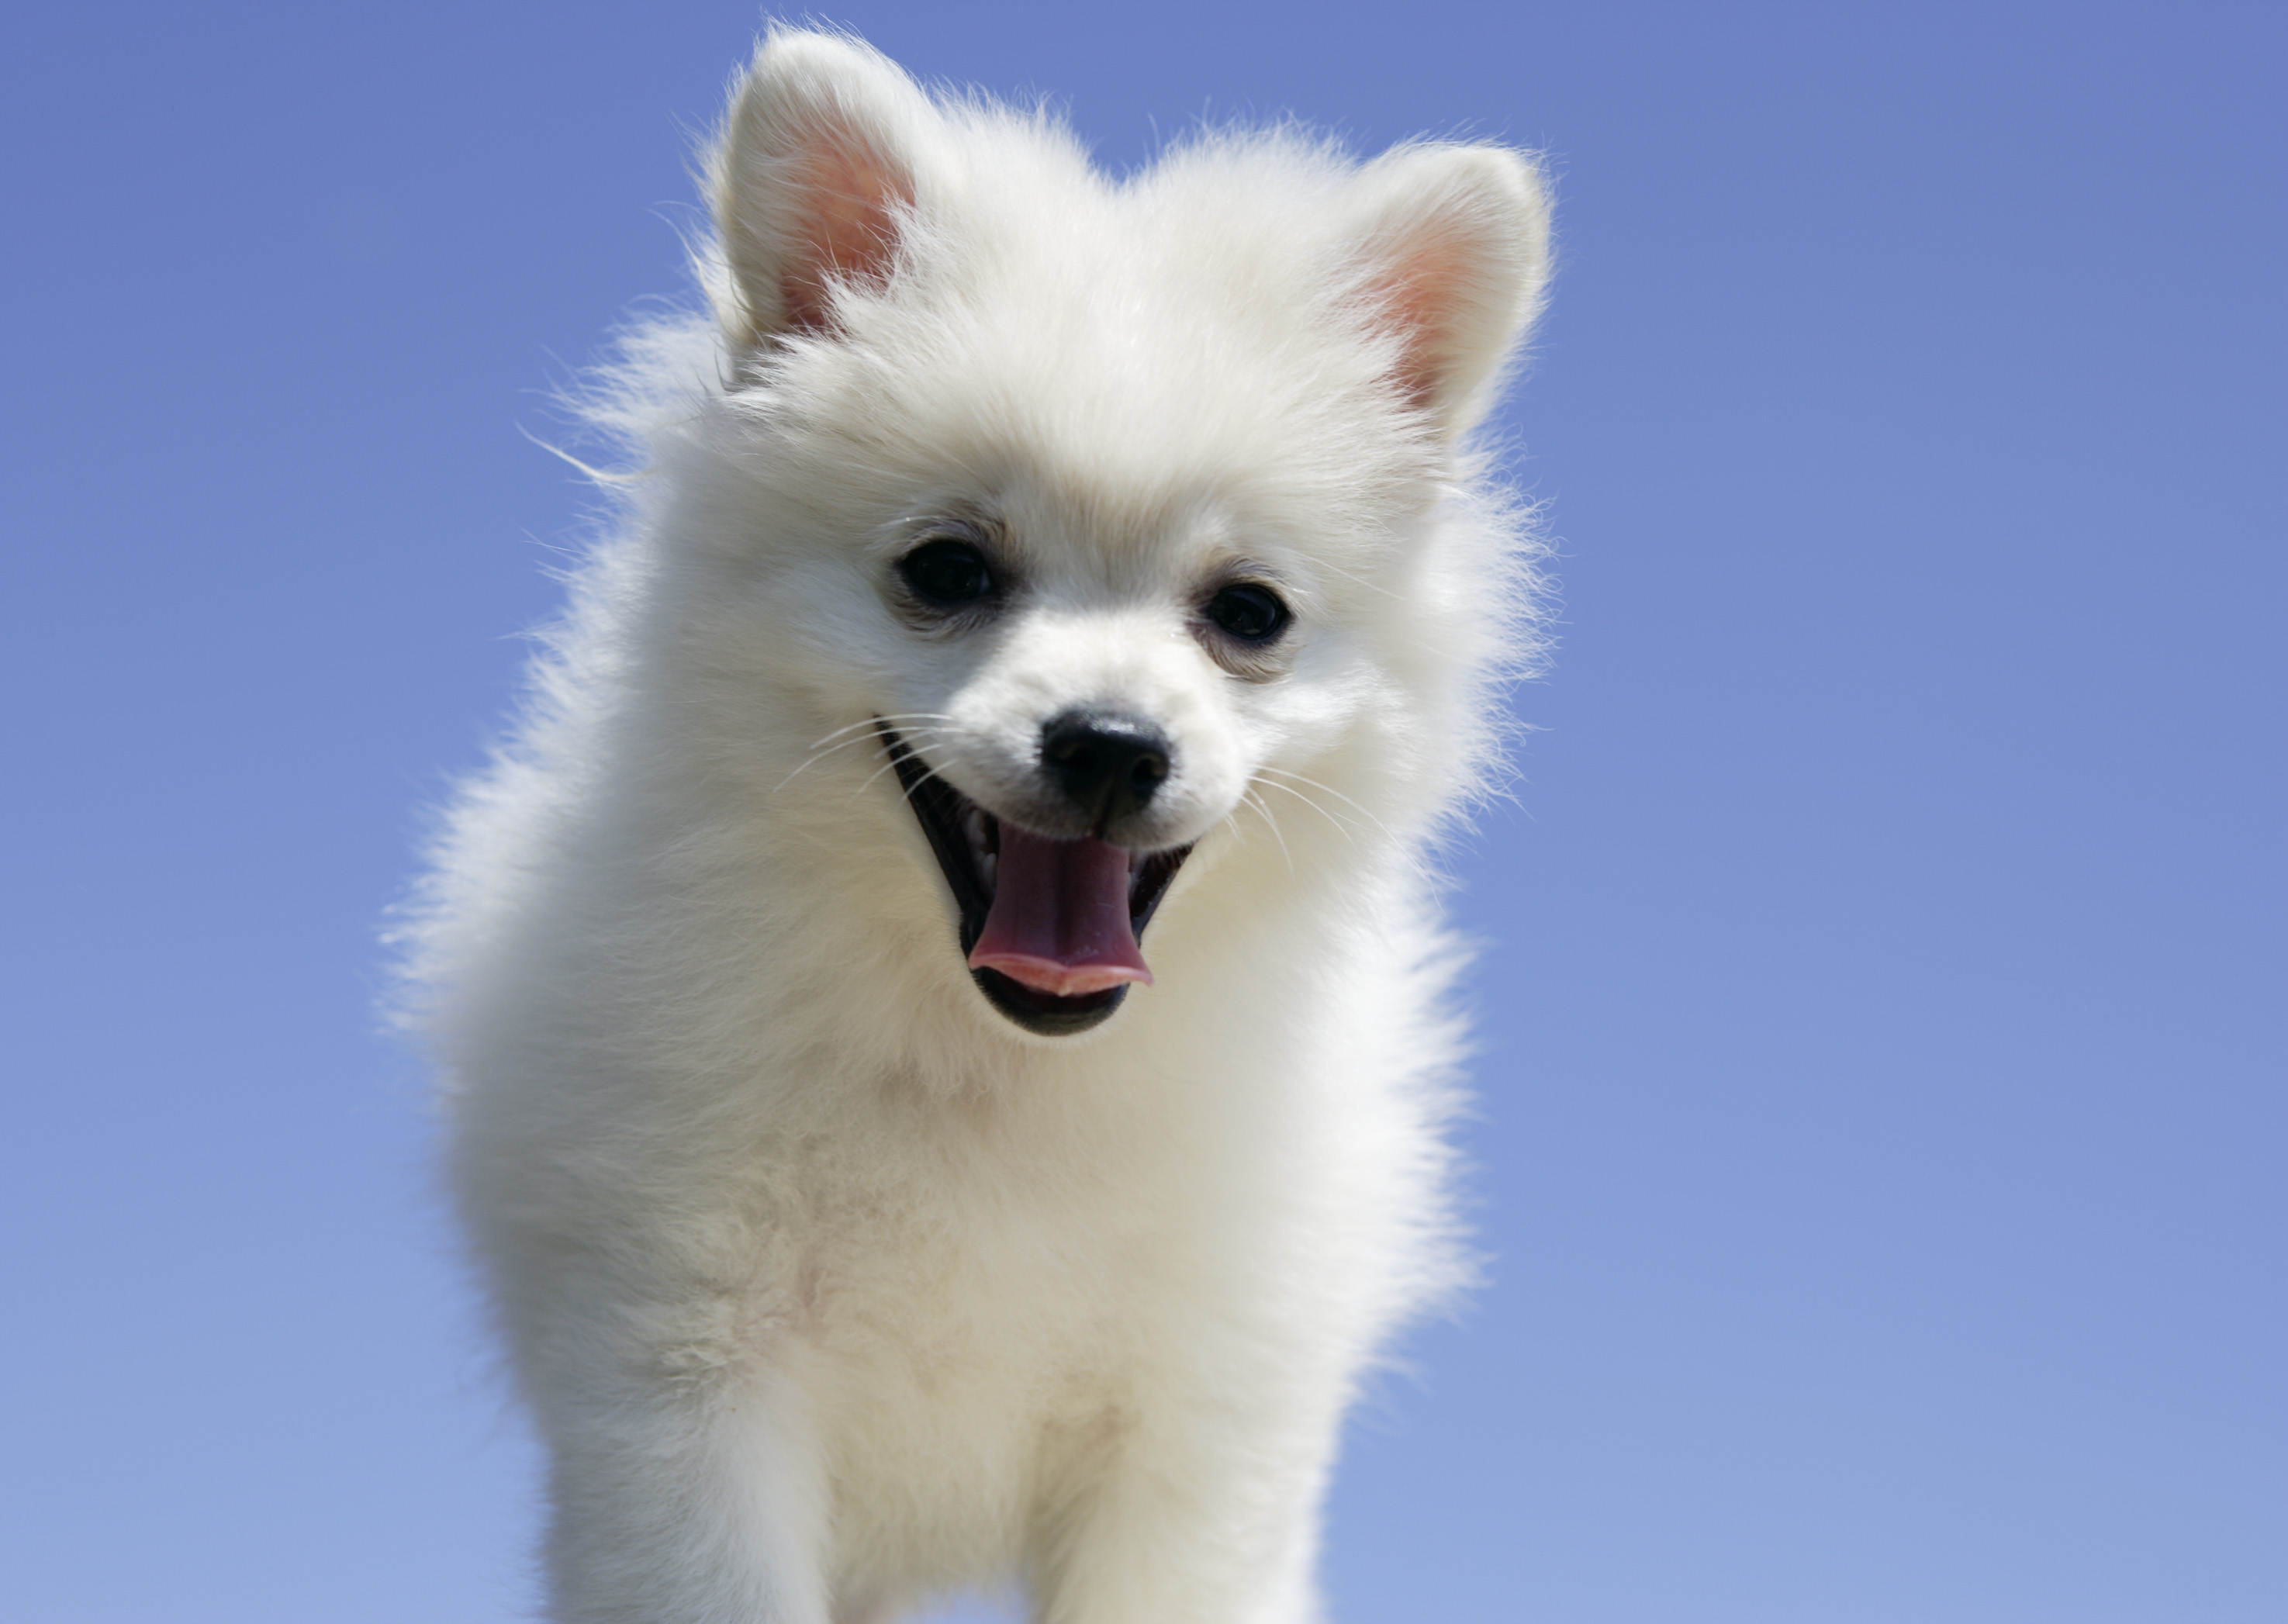 135747 download wallpaper puppy, animals, dog, language, tongue screensavers and pictures for free